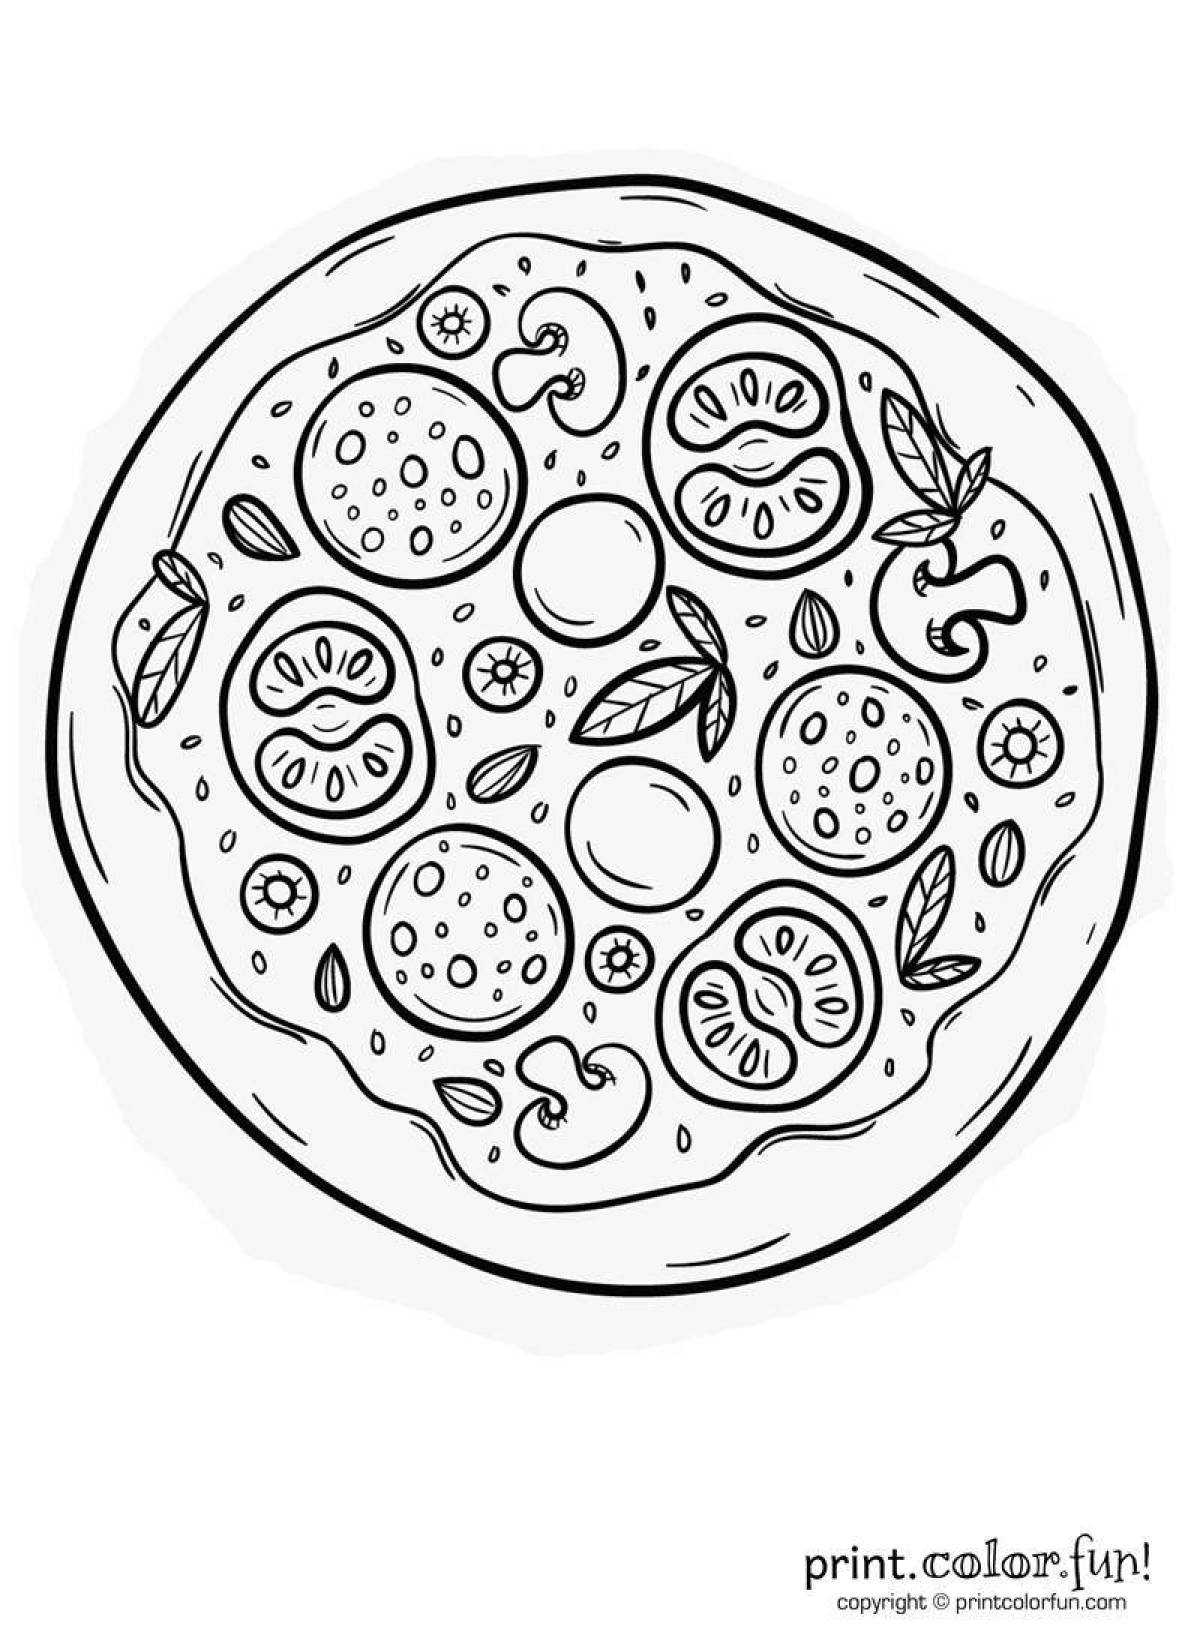 Animated pizza coloring page